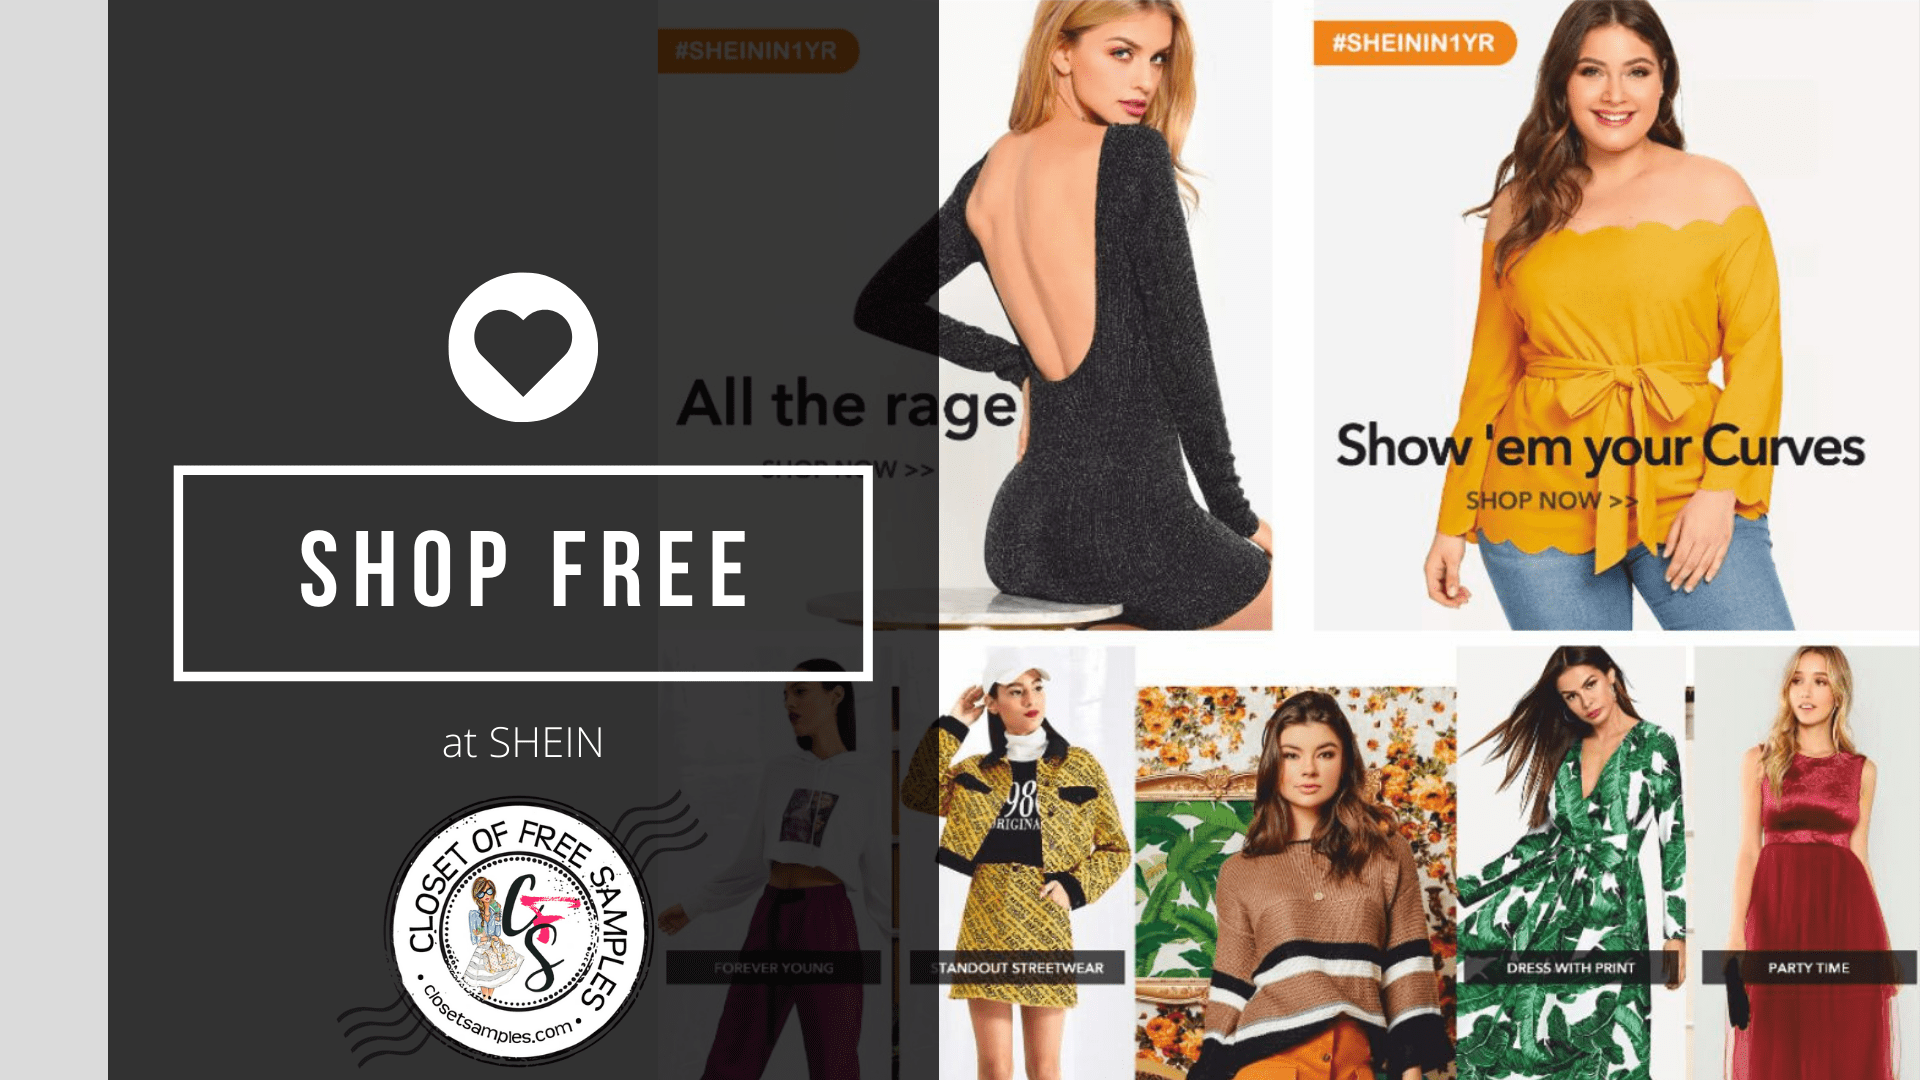 How-to-Get-Free-Clothes-from-SHEIN-closetsamples.png